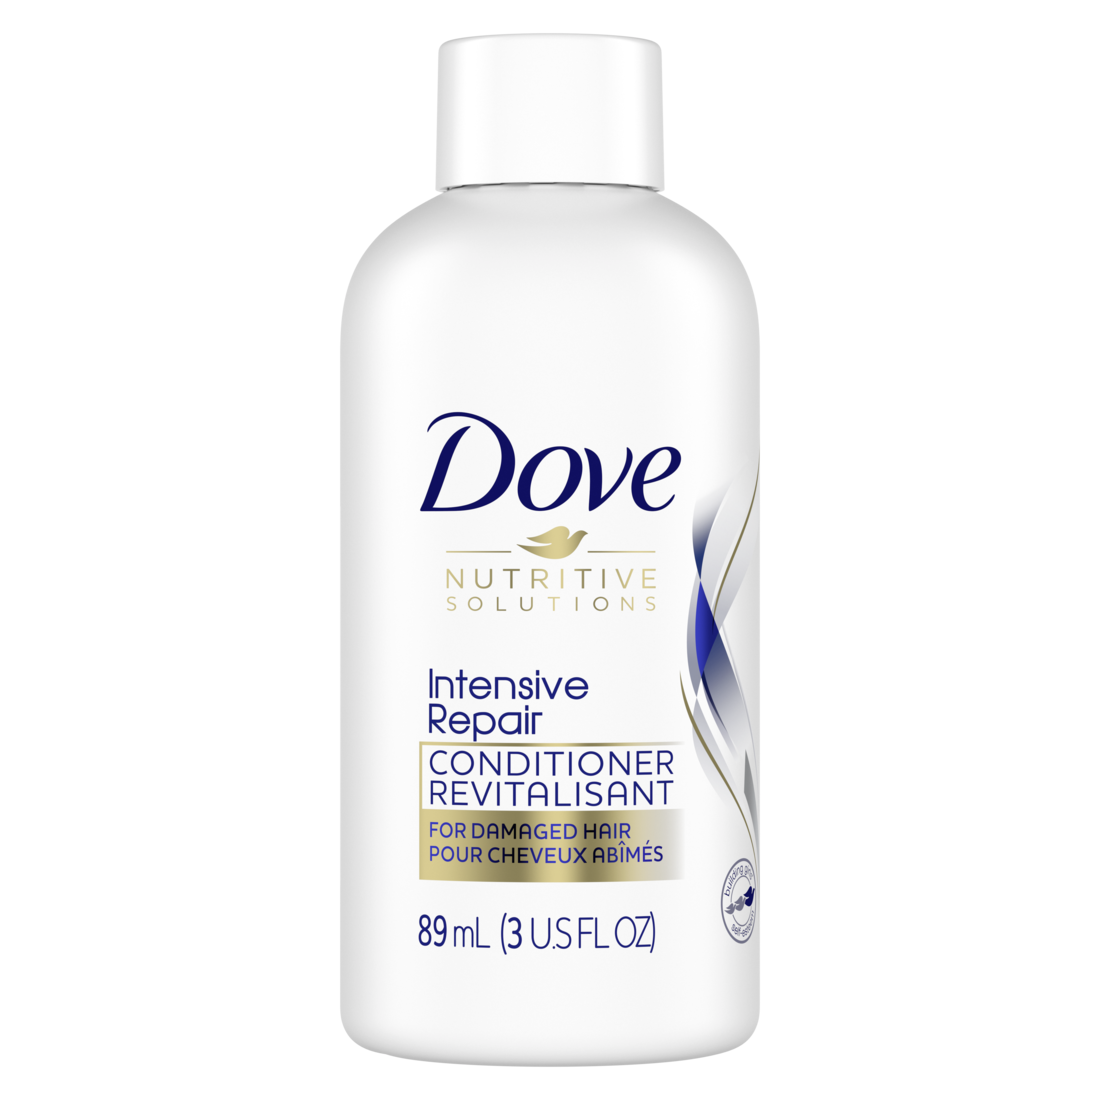 Displaying the front view of the Dove Intensive Repair Conditioner 89mL